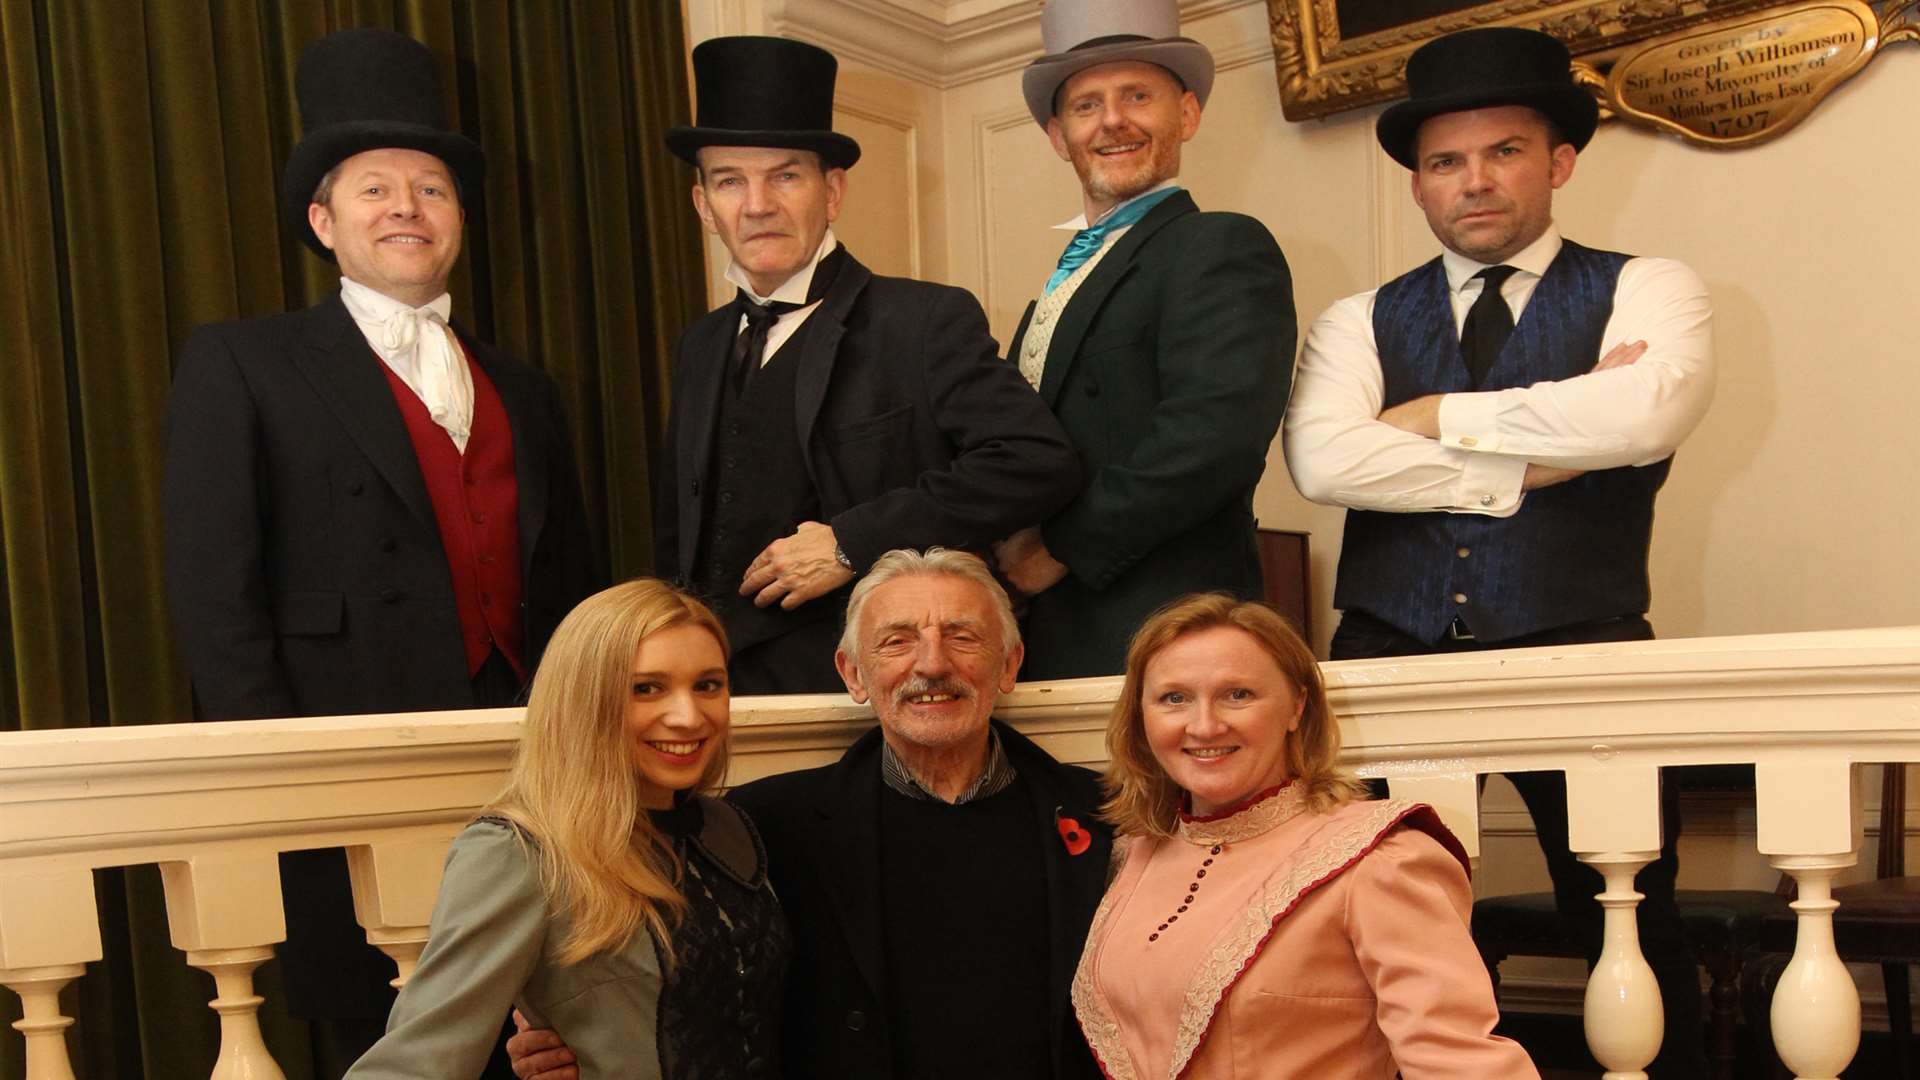 Eric Richard from the Bill with the cast of the Dickens production.